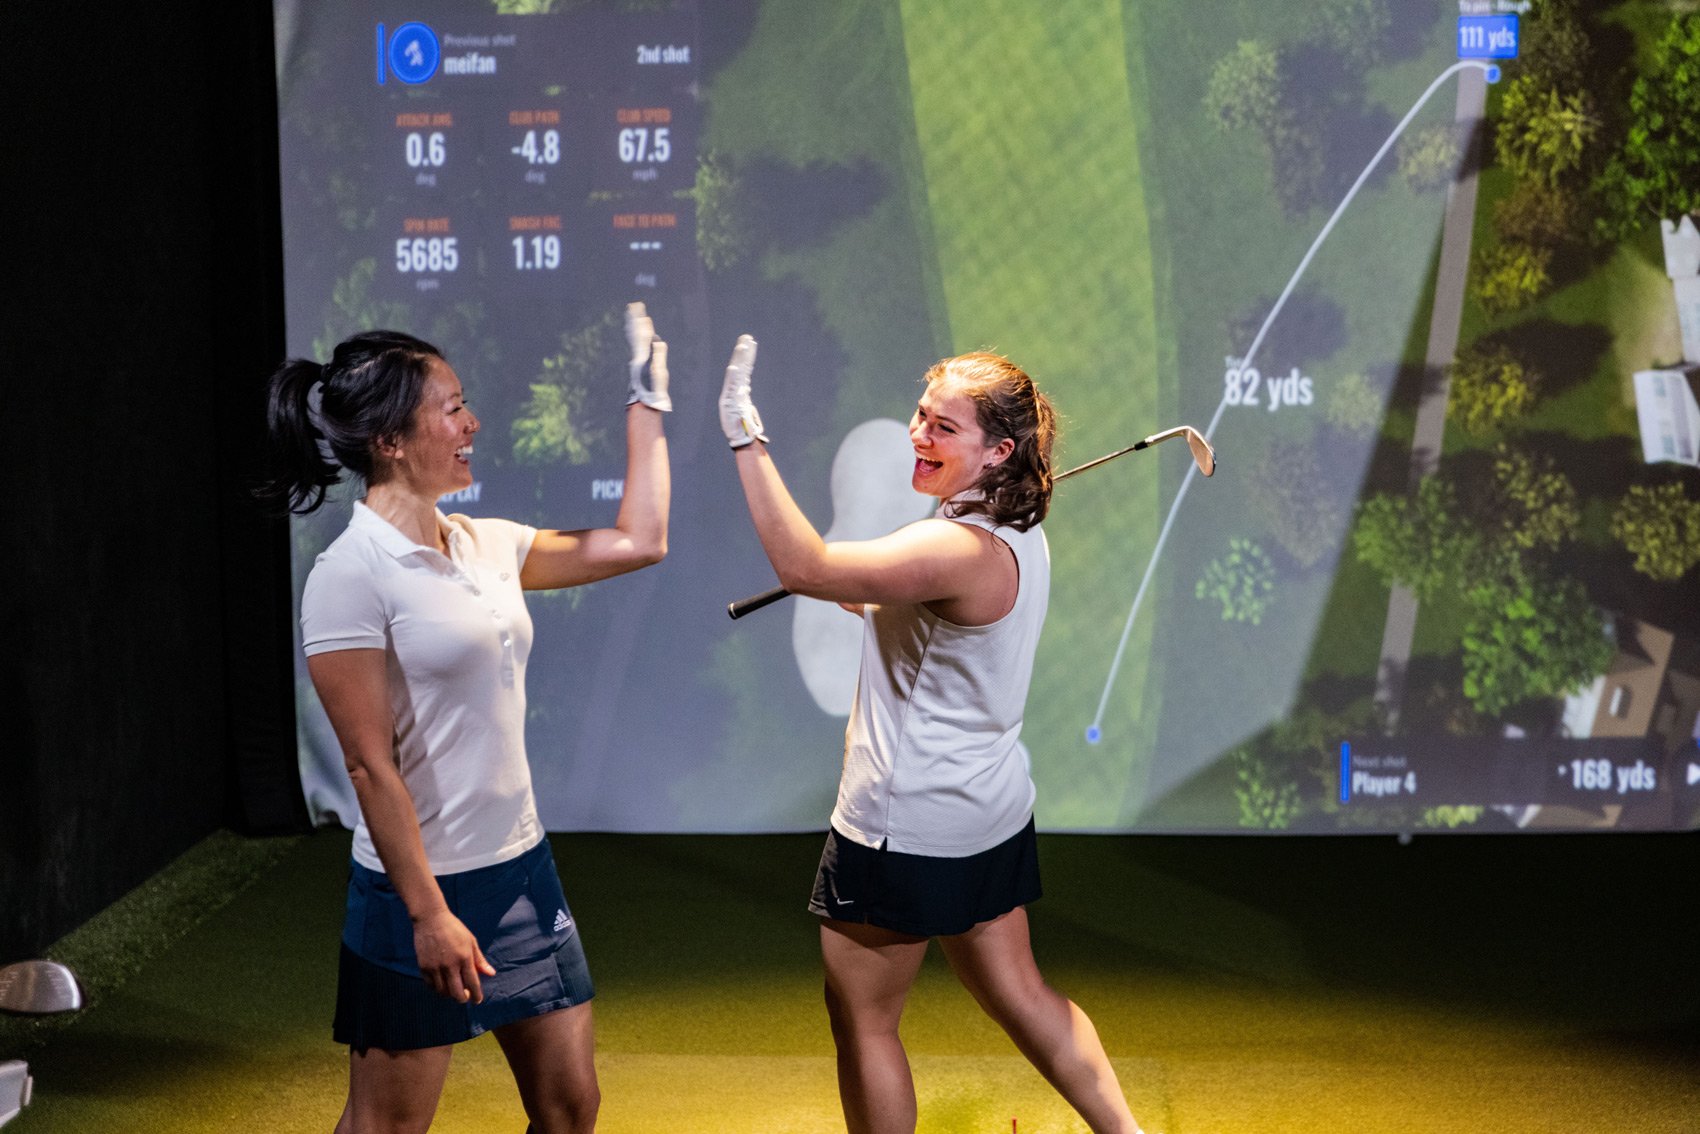 Team Building Activities for Executives - Two Women Executives in Golf Simulator